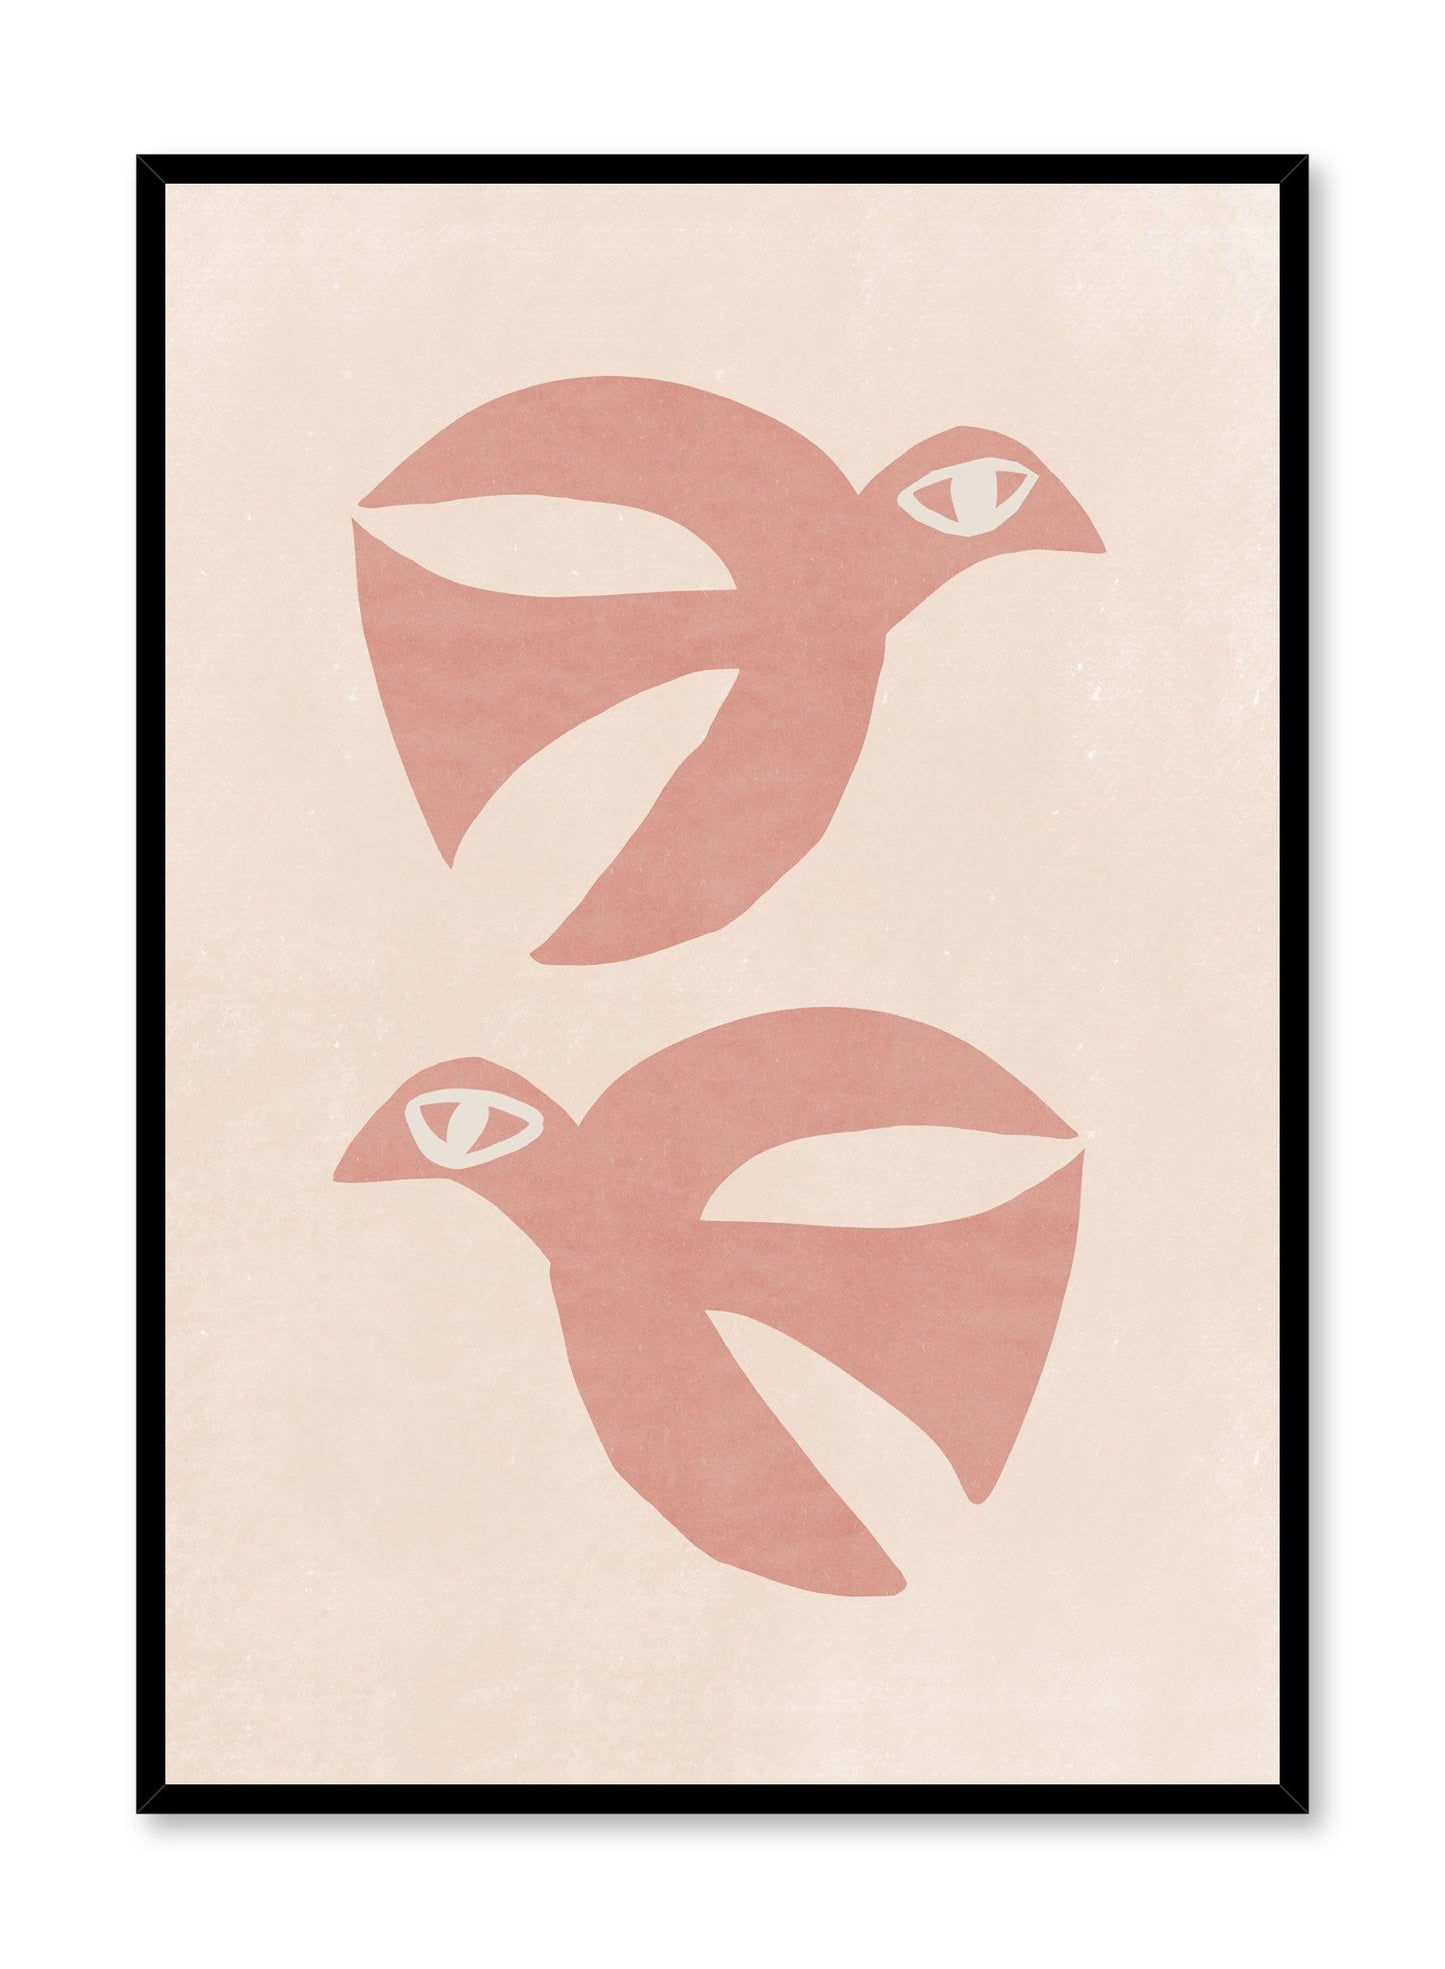 Modern minimalist illustration poster by Opposite Wall with pink birds